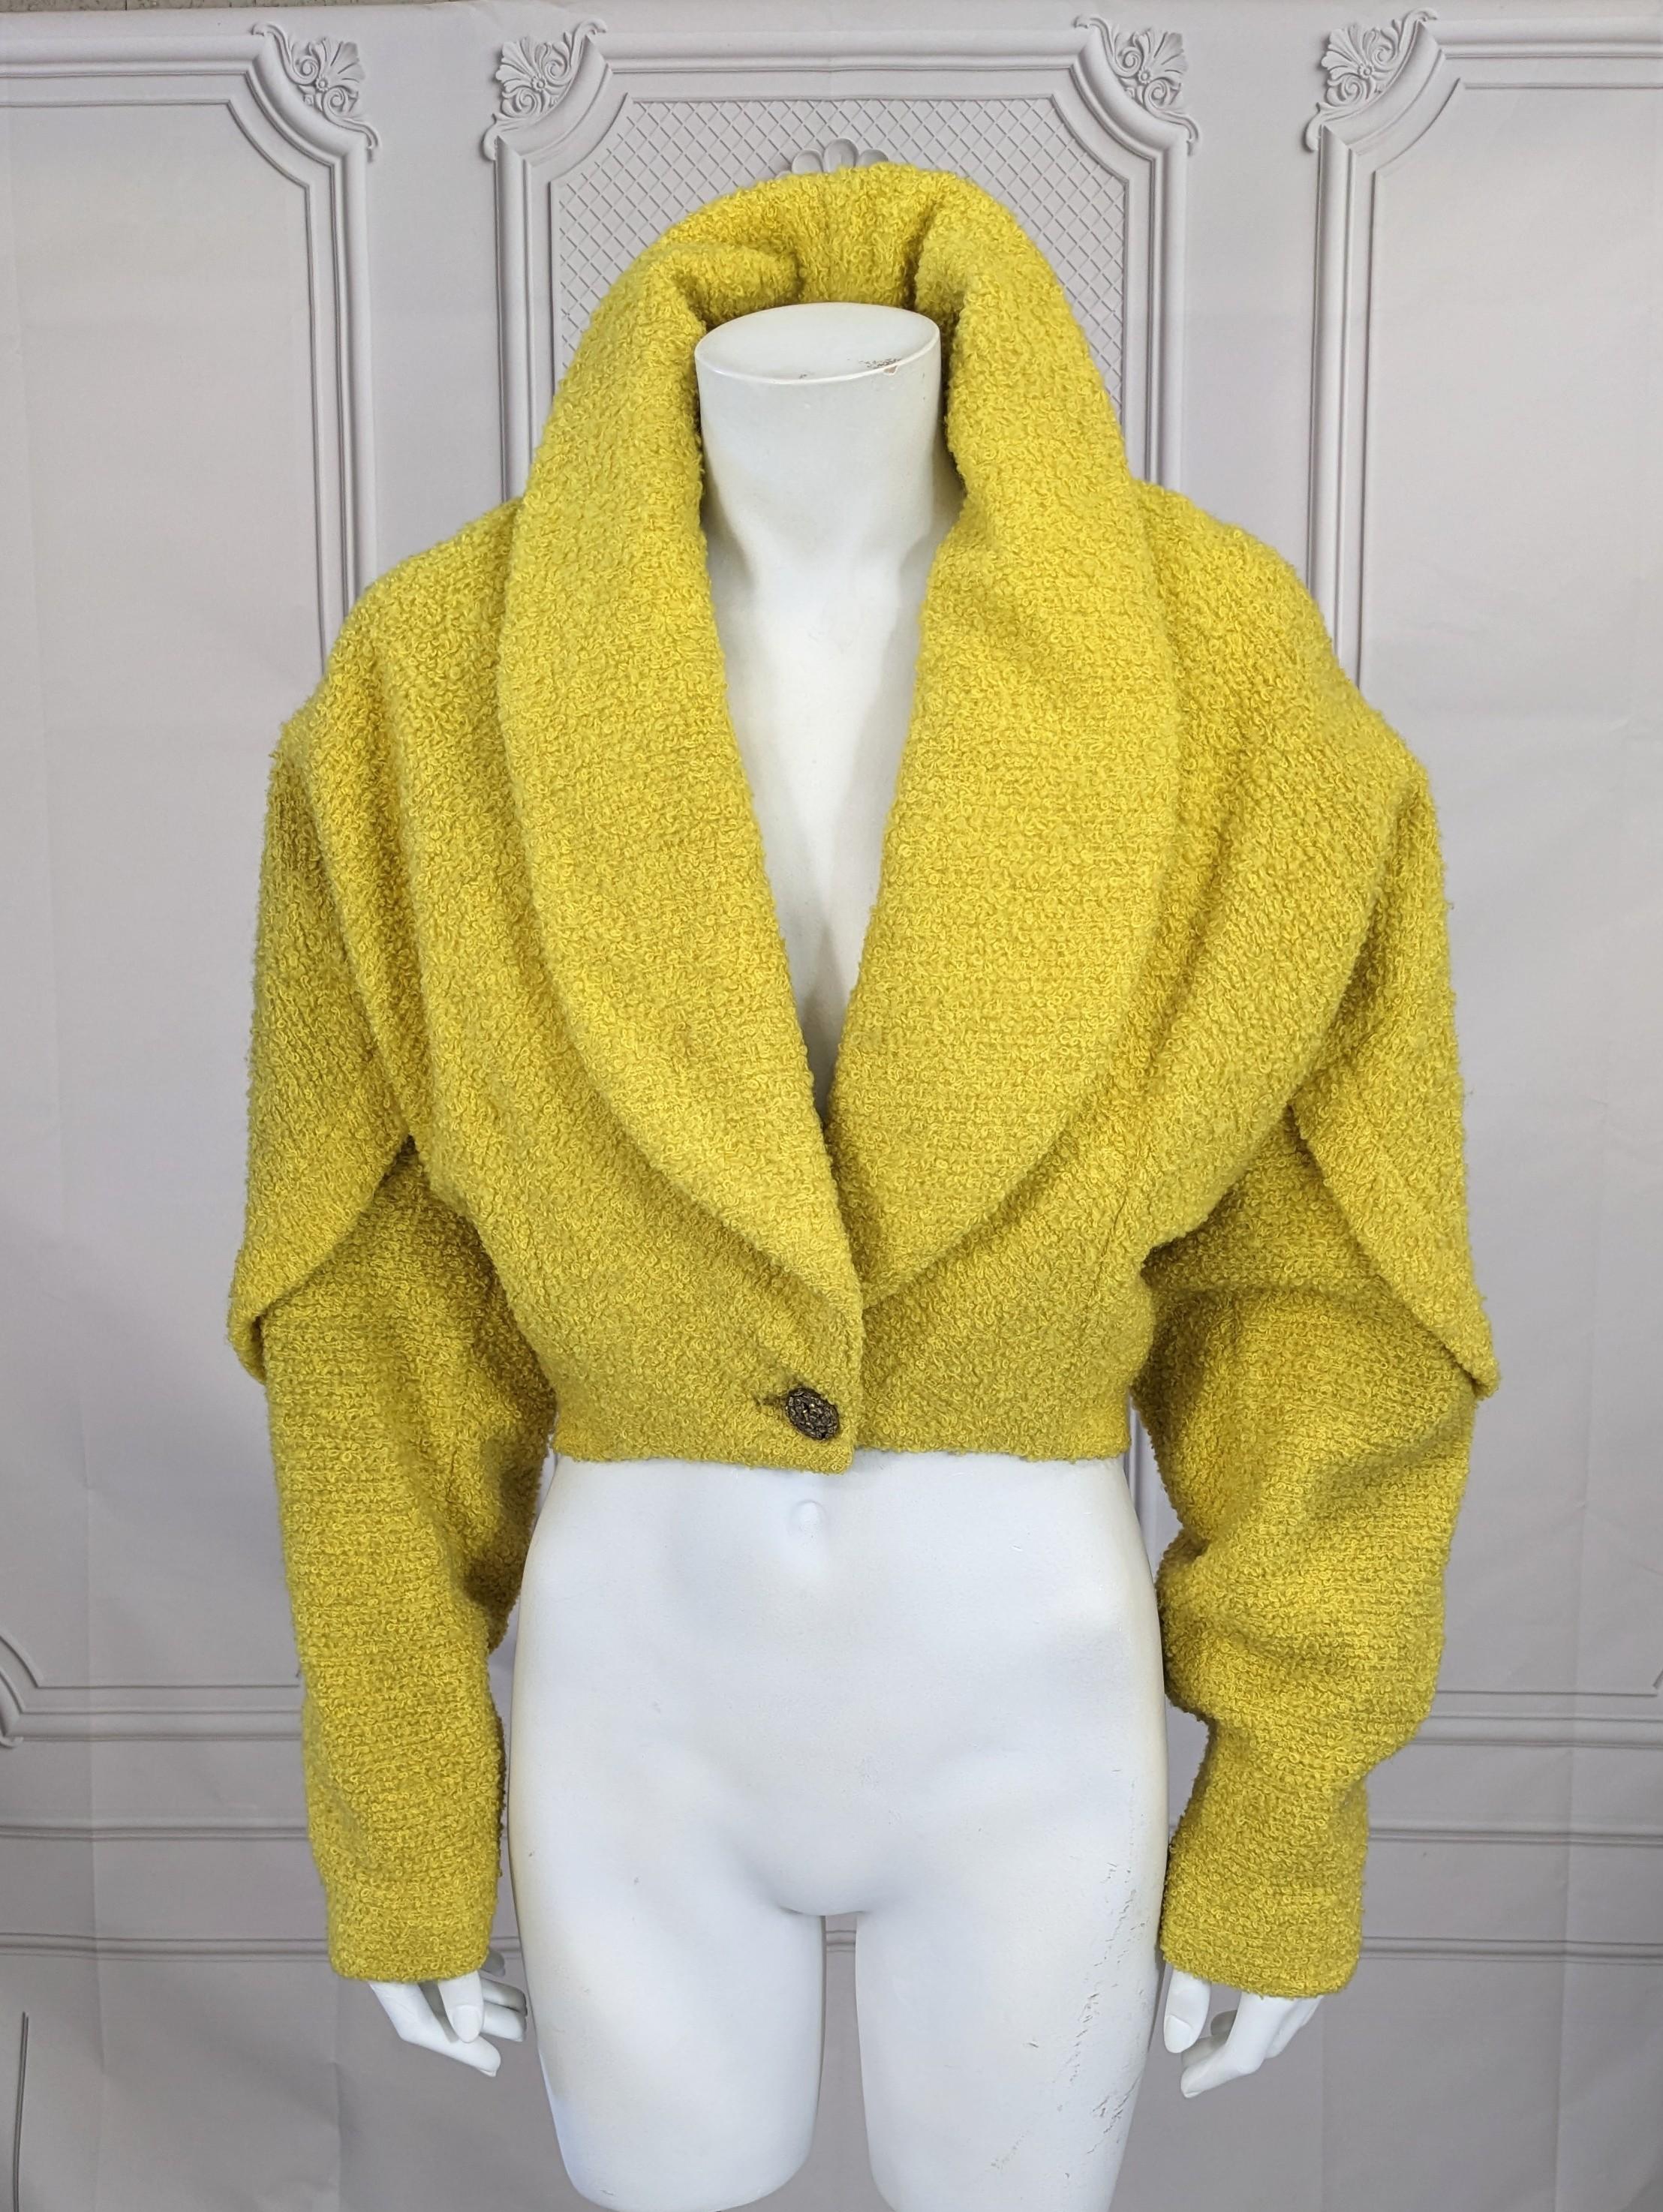 Unusual Chrome Yellow Wool Boucle Bolero Jacket from the 1950's by Ranleigh retailed at I. Magnin, very Alaia in shape. Boucle looped wool in a vibrant punch of color. Full cut through shoulders and bust with tight waist. Faux cape line cut extends